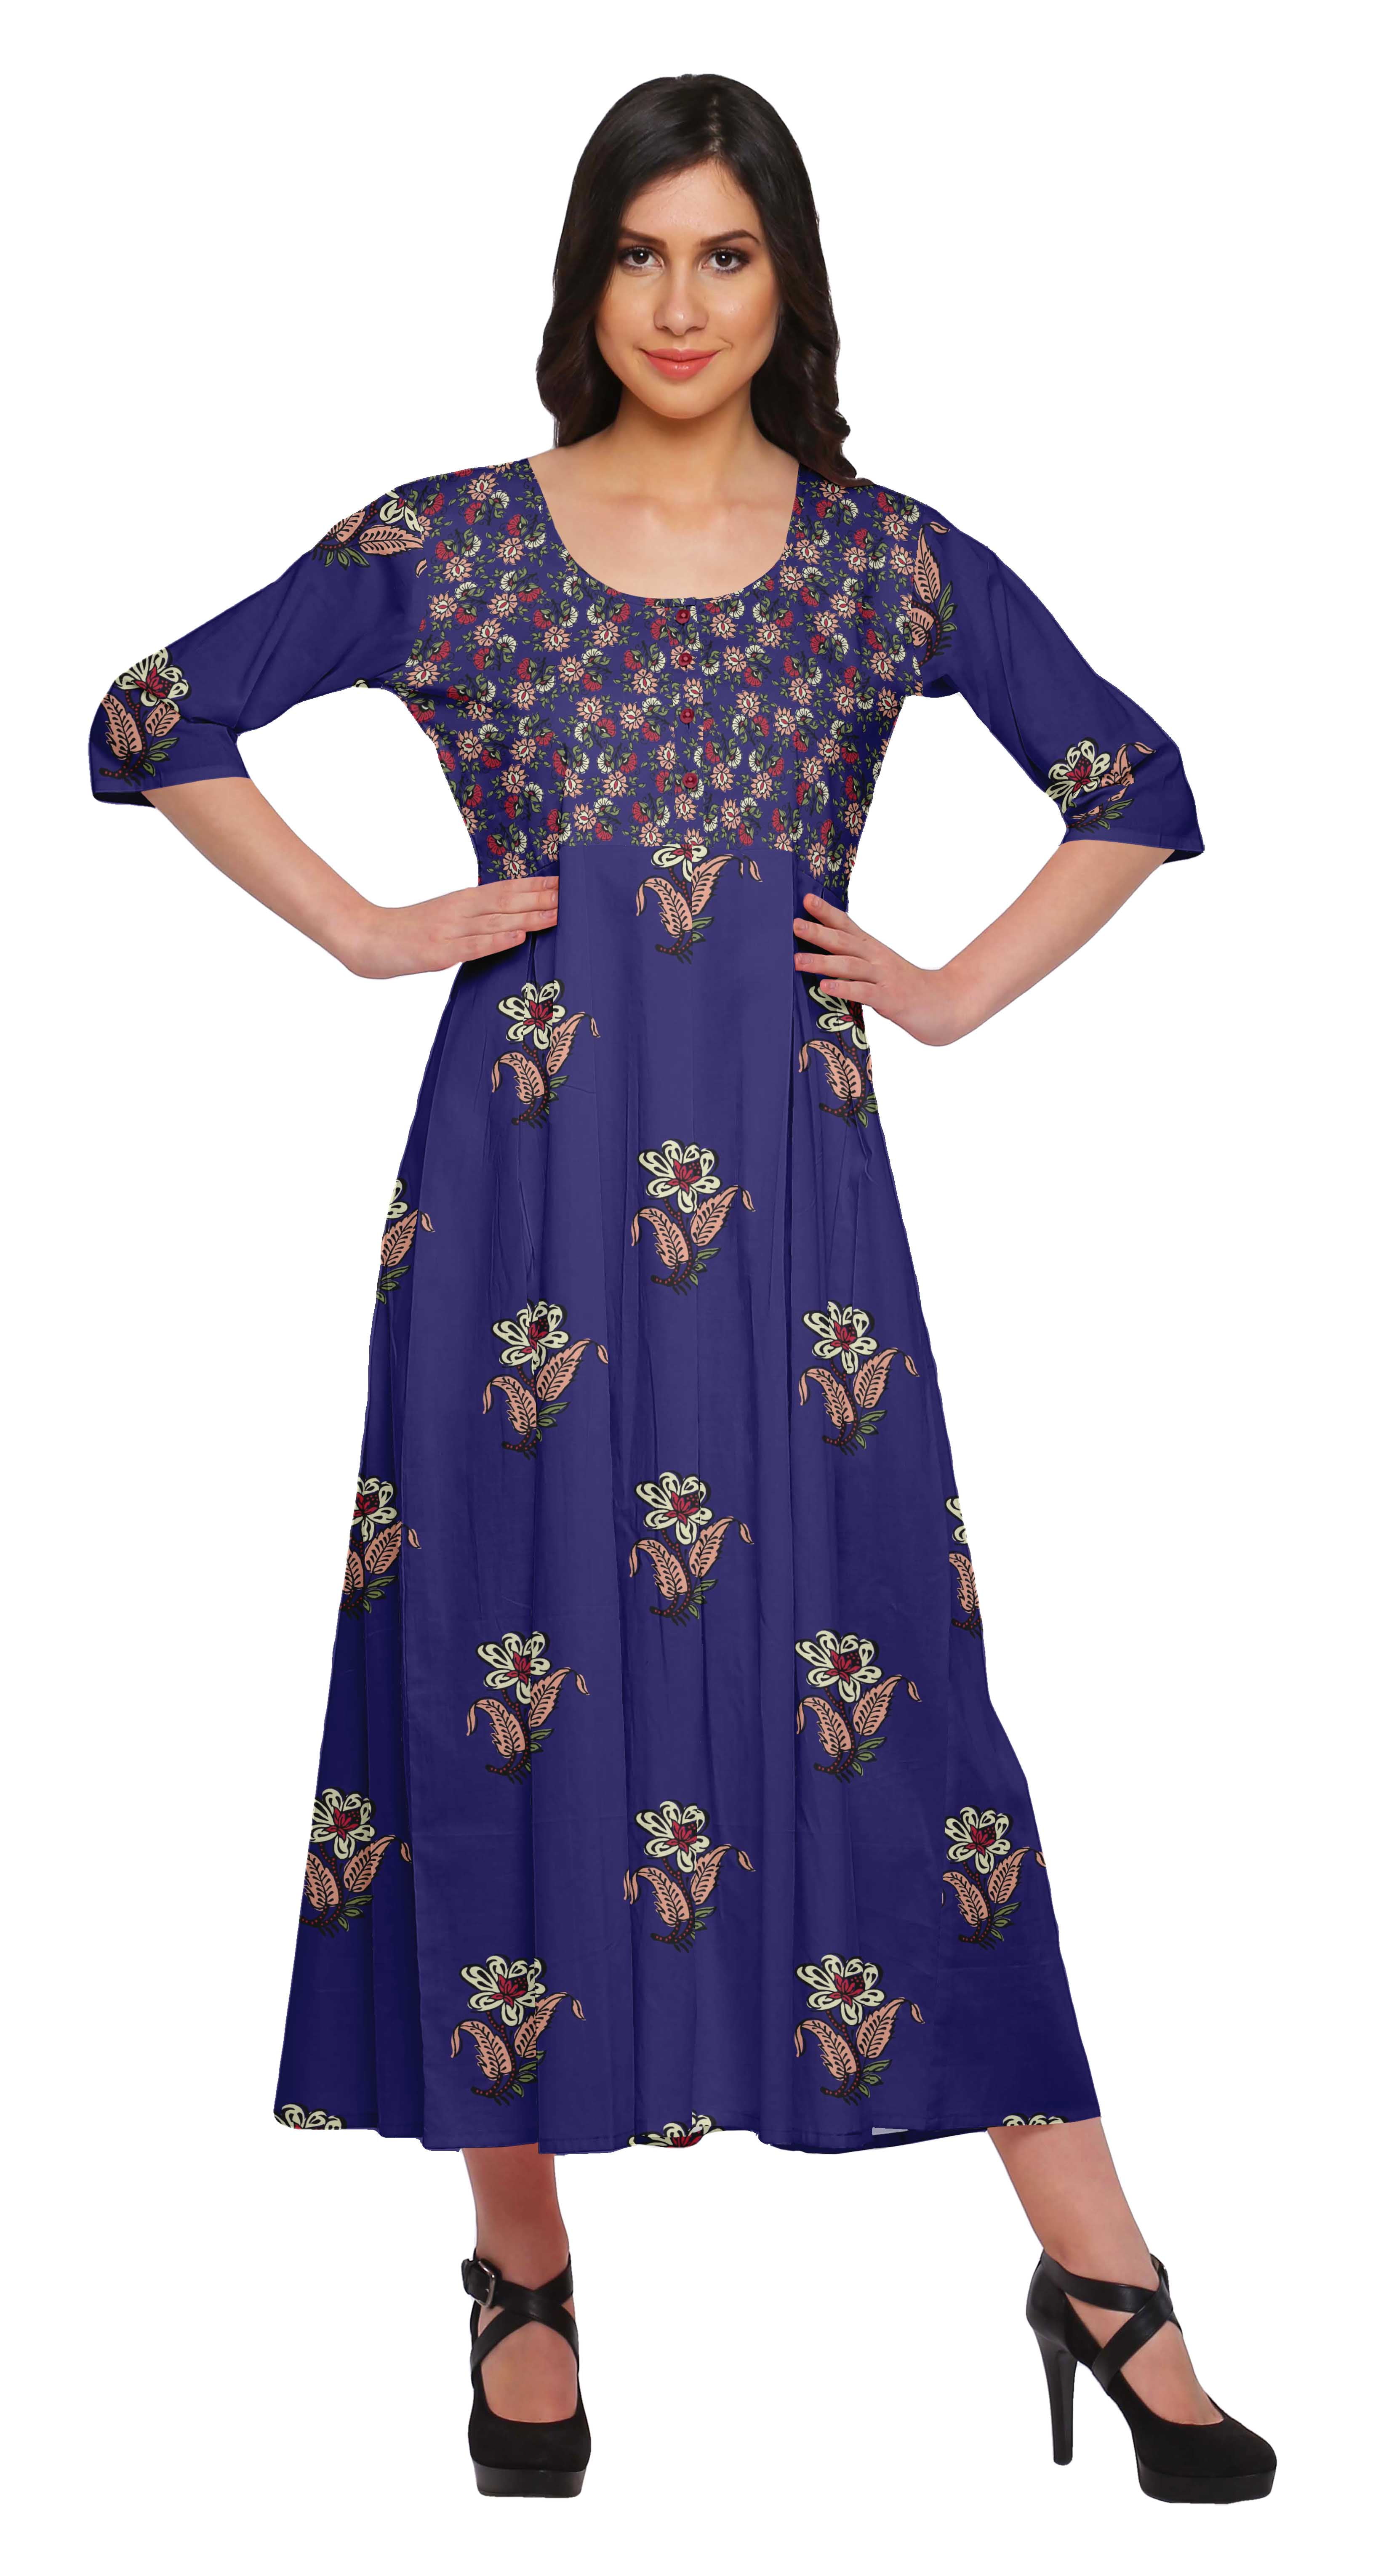 Details about   Women Multi Color 3/4 Sleeve Cotton Kurti Round Neck Printed Comfortable 